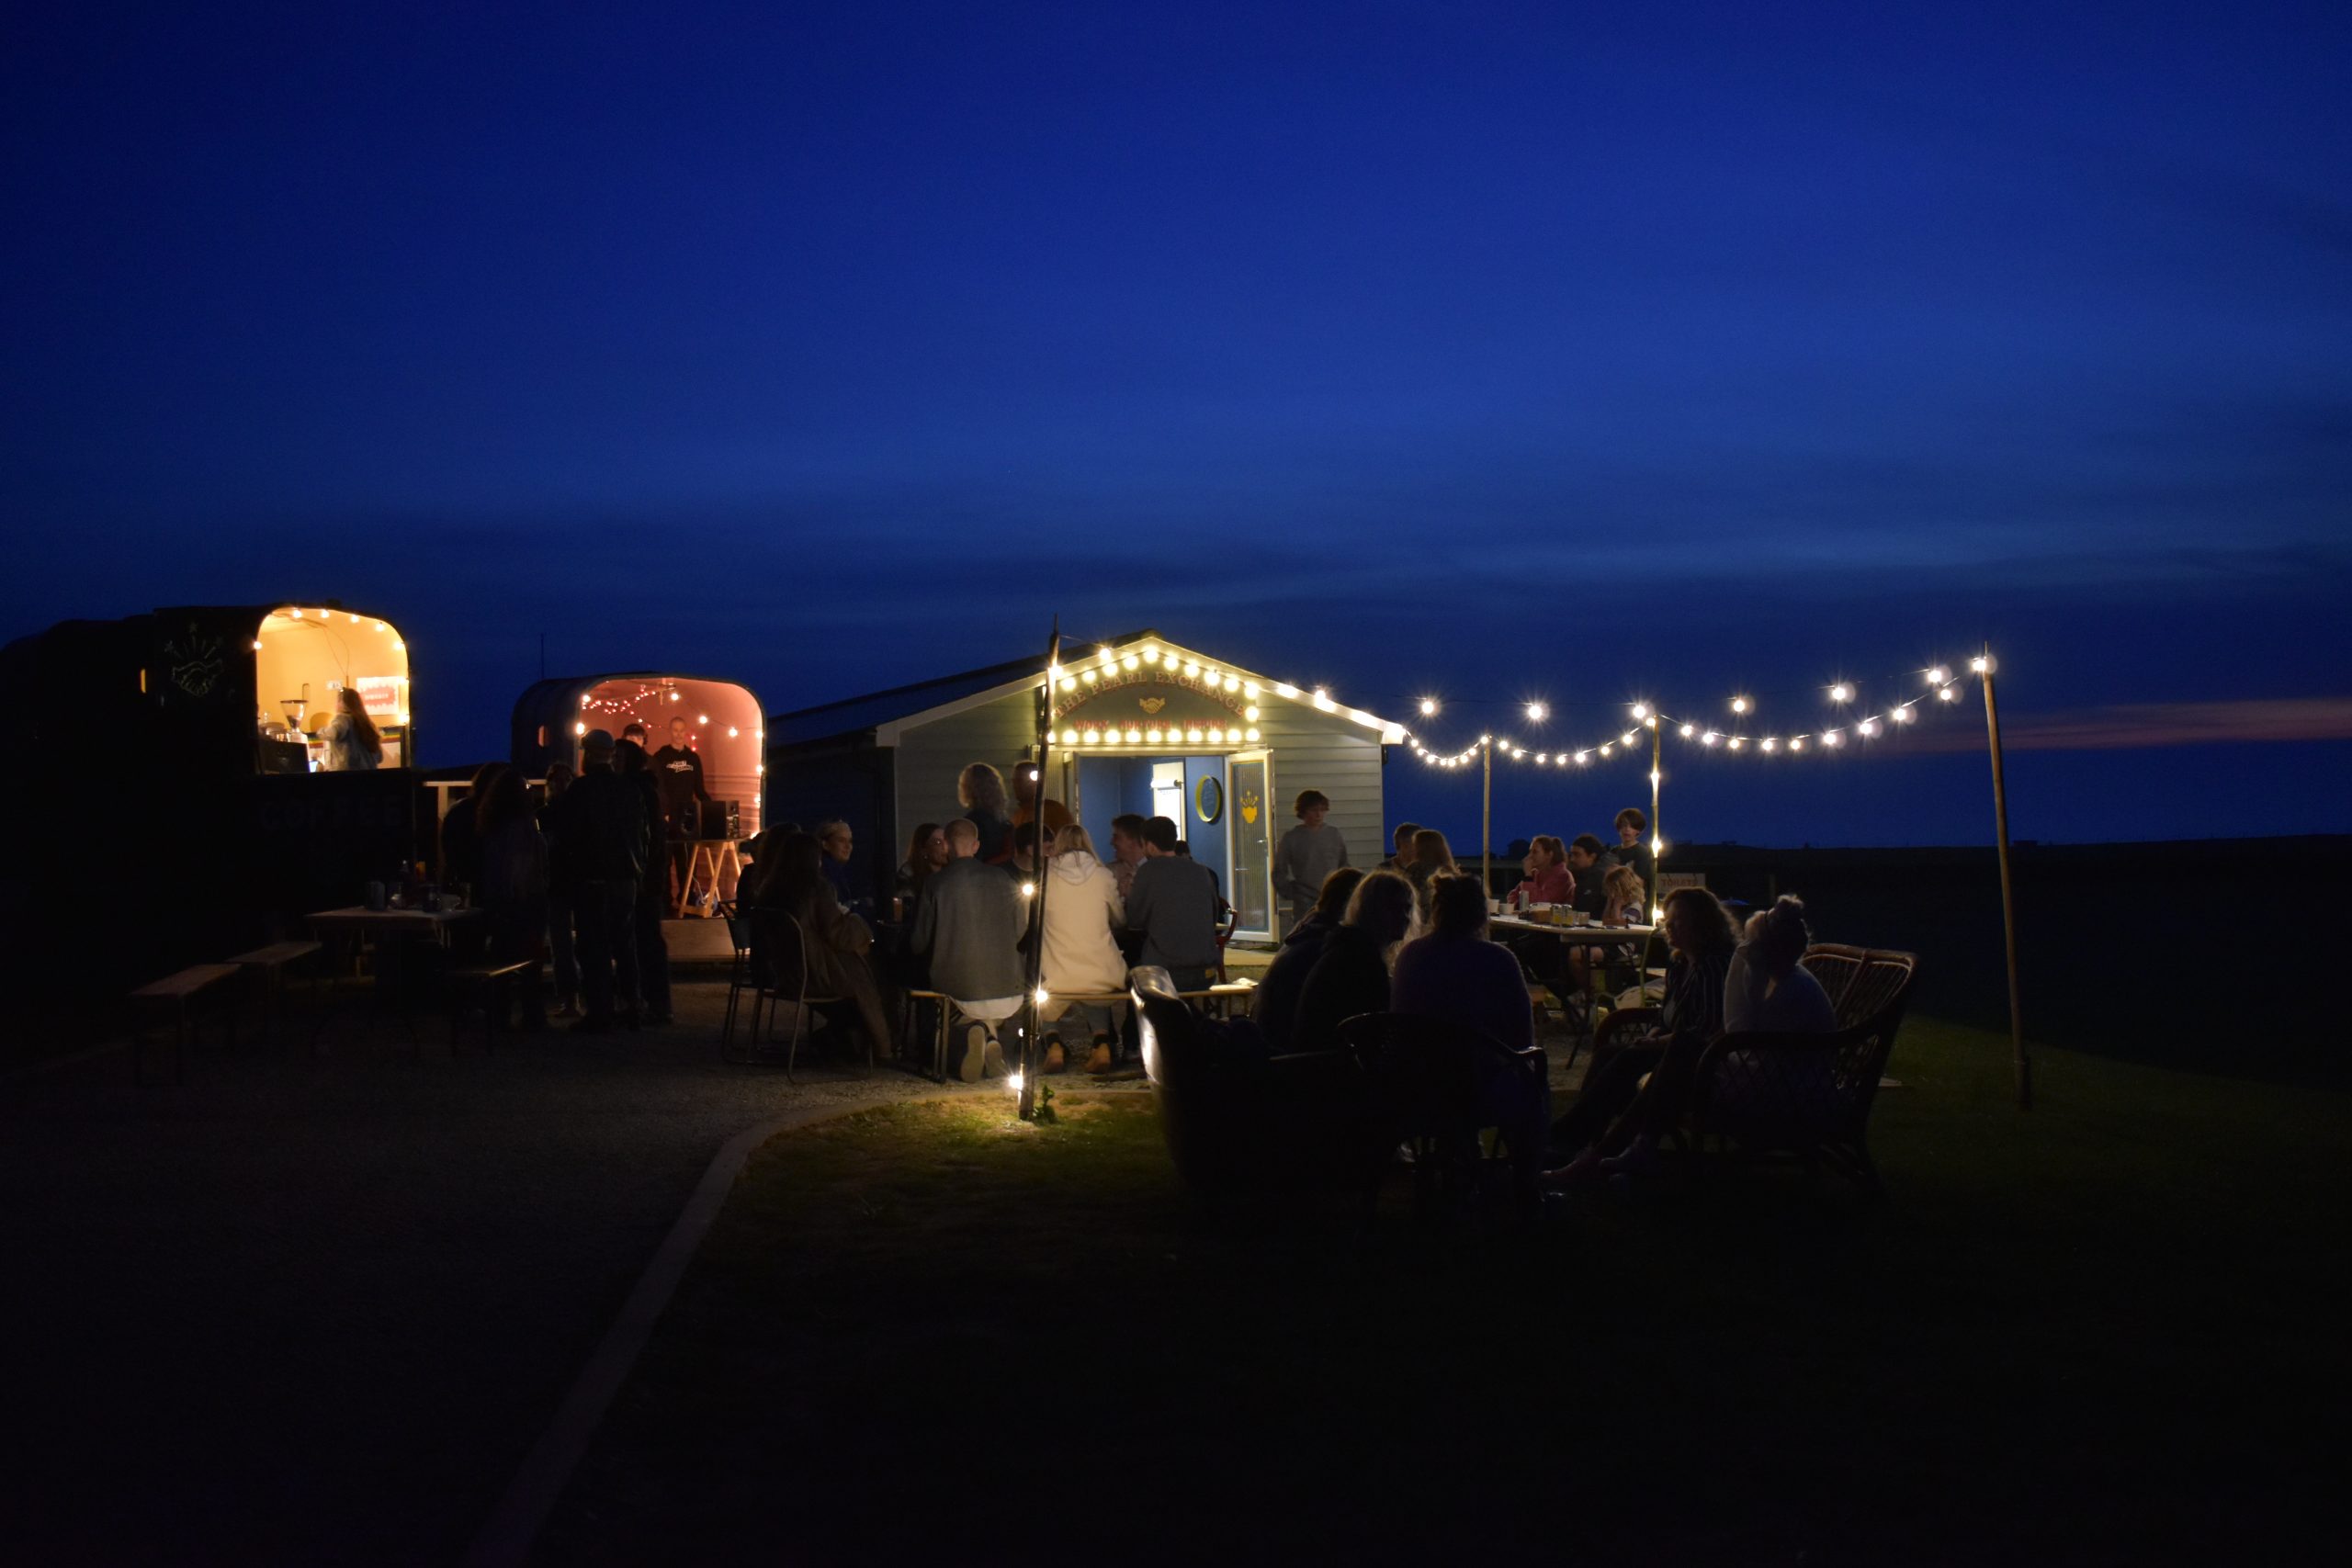 a photo of the outdoor space at the Pearl Exchange with fairy lights, a DJ booth, the Horsebox cafe serving drinks and lots of people sitting and chatting